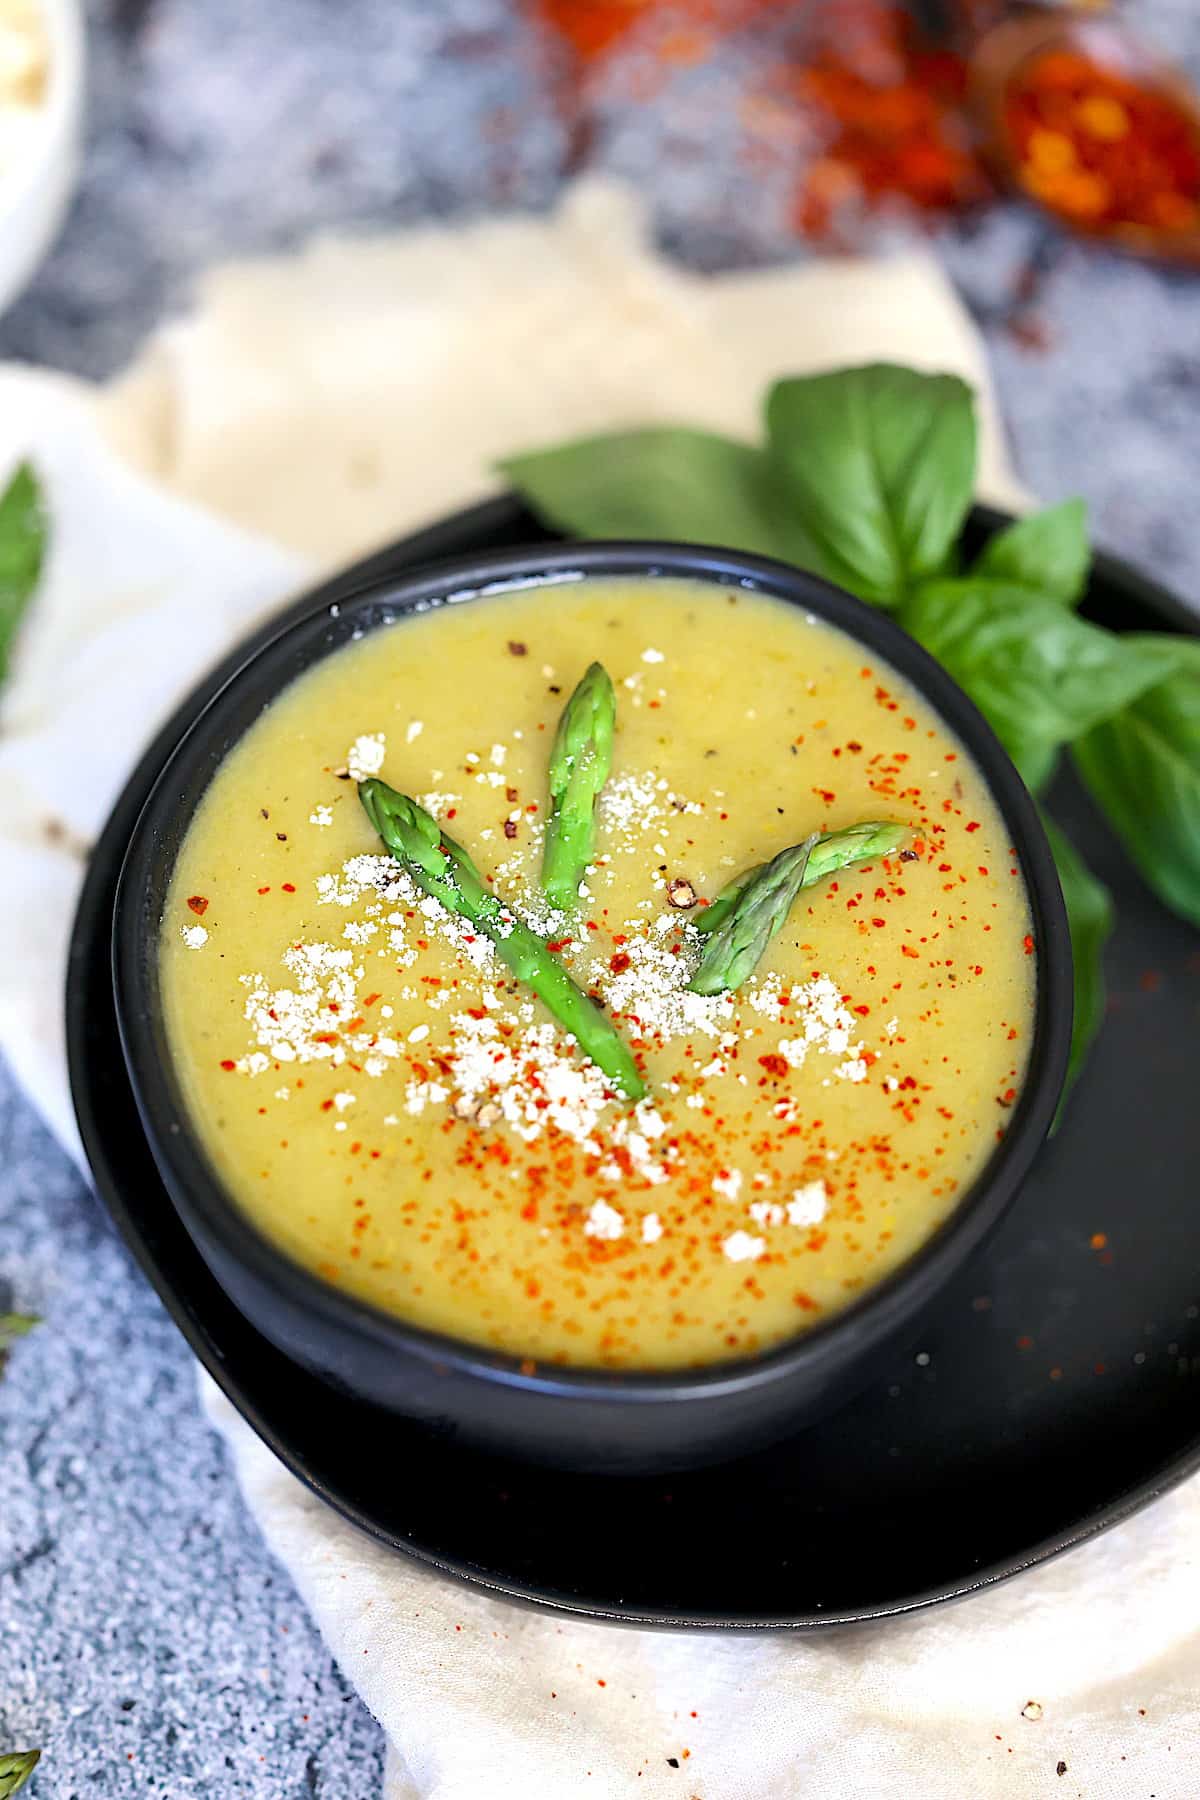 instant pot asparagus soup in black bowl with red pepper flakes, parmesan cheese and asparagus tips